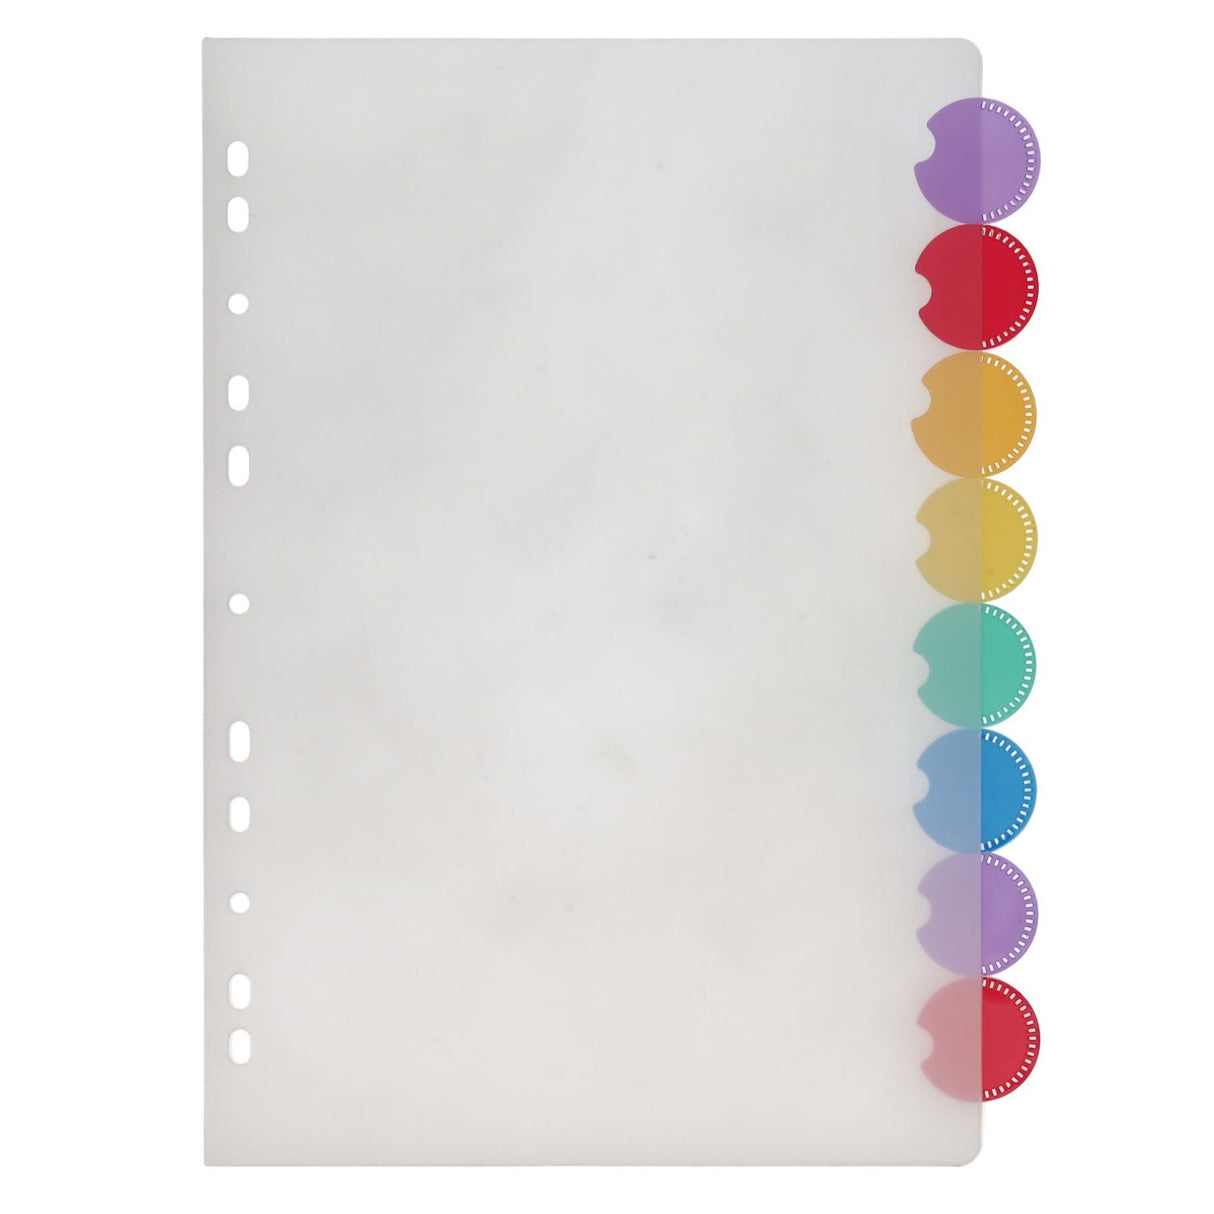 Premier Office A4 Designer Subject Dividers - Round Tab Design - 8 Tabs | Stationery Shop UK